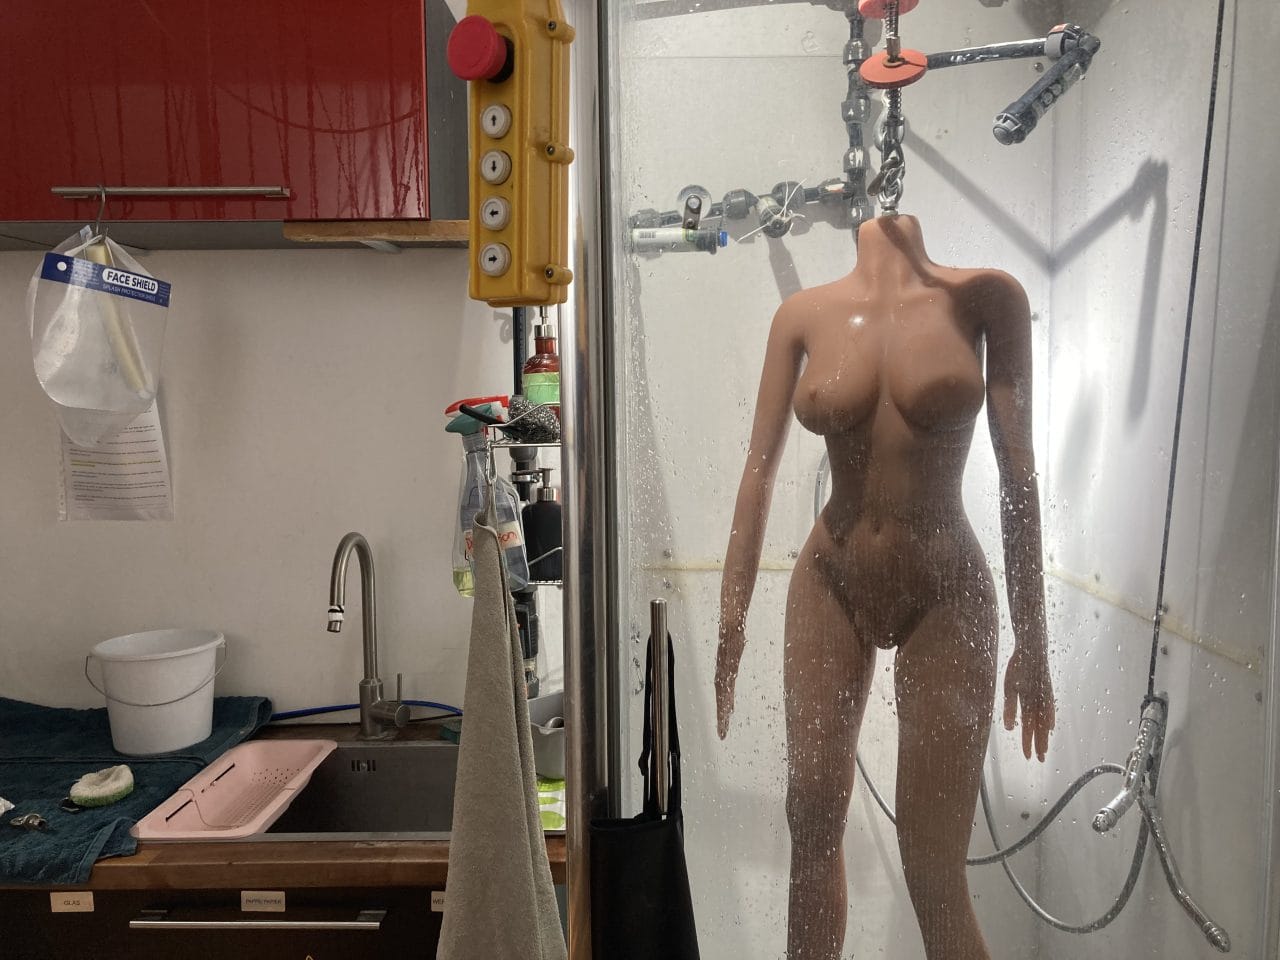 A mannequin in a bathroom with a shower at a cyberbrothel.